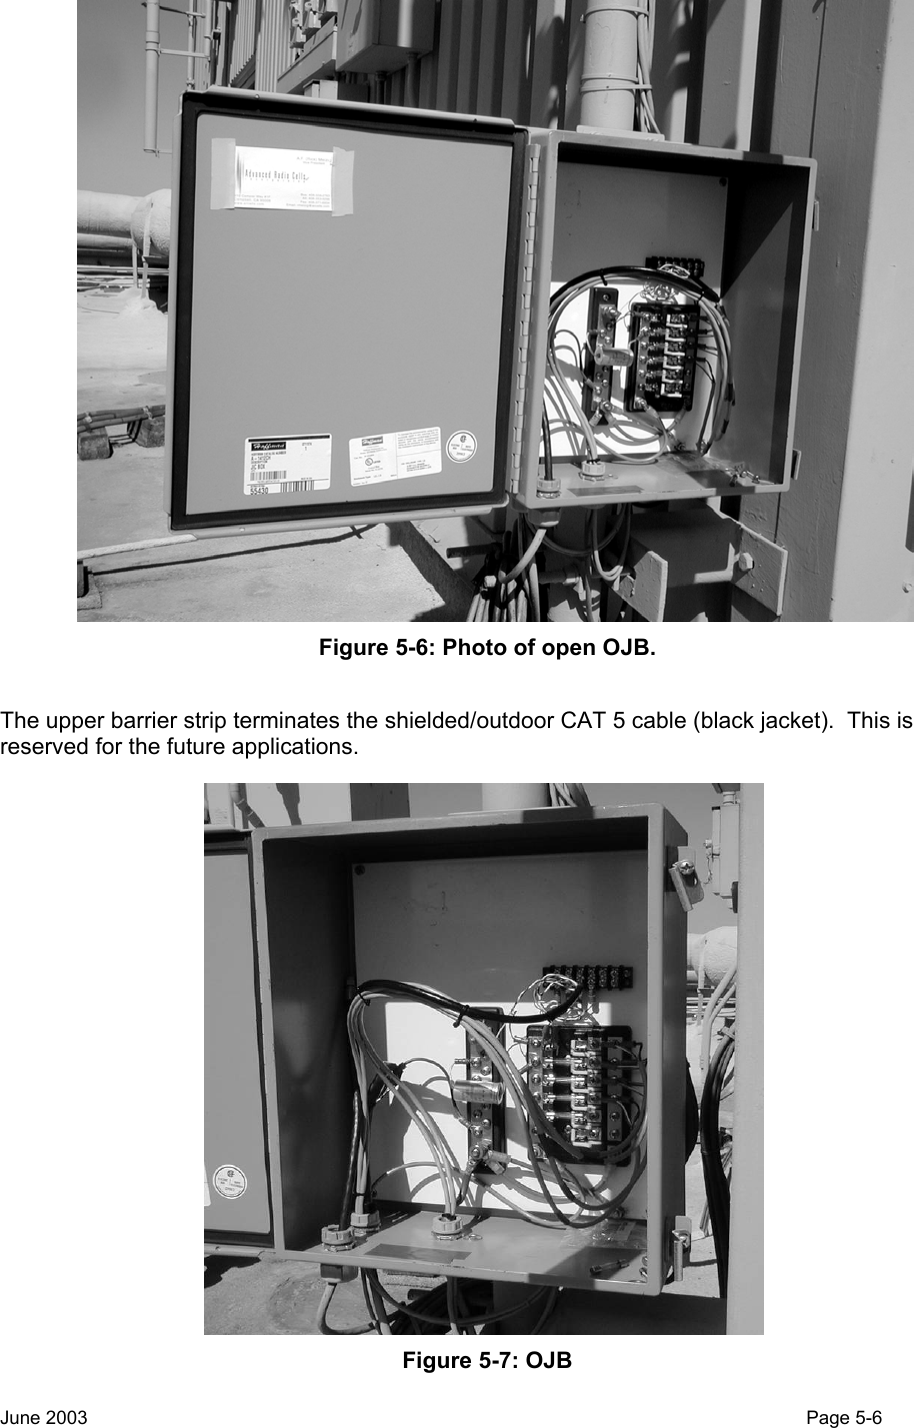   Figure 5-6: Photo of open OJB.  The upper barrier strip terminates the shielded/outdoor CAT 5 cable (black jacket).  This is reserved for the future applications.  Figure 5-7: OJB June 2003                                                                                                                                          Page 5-6  